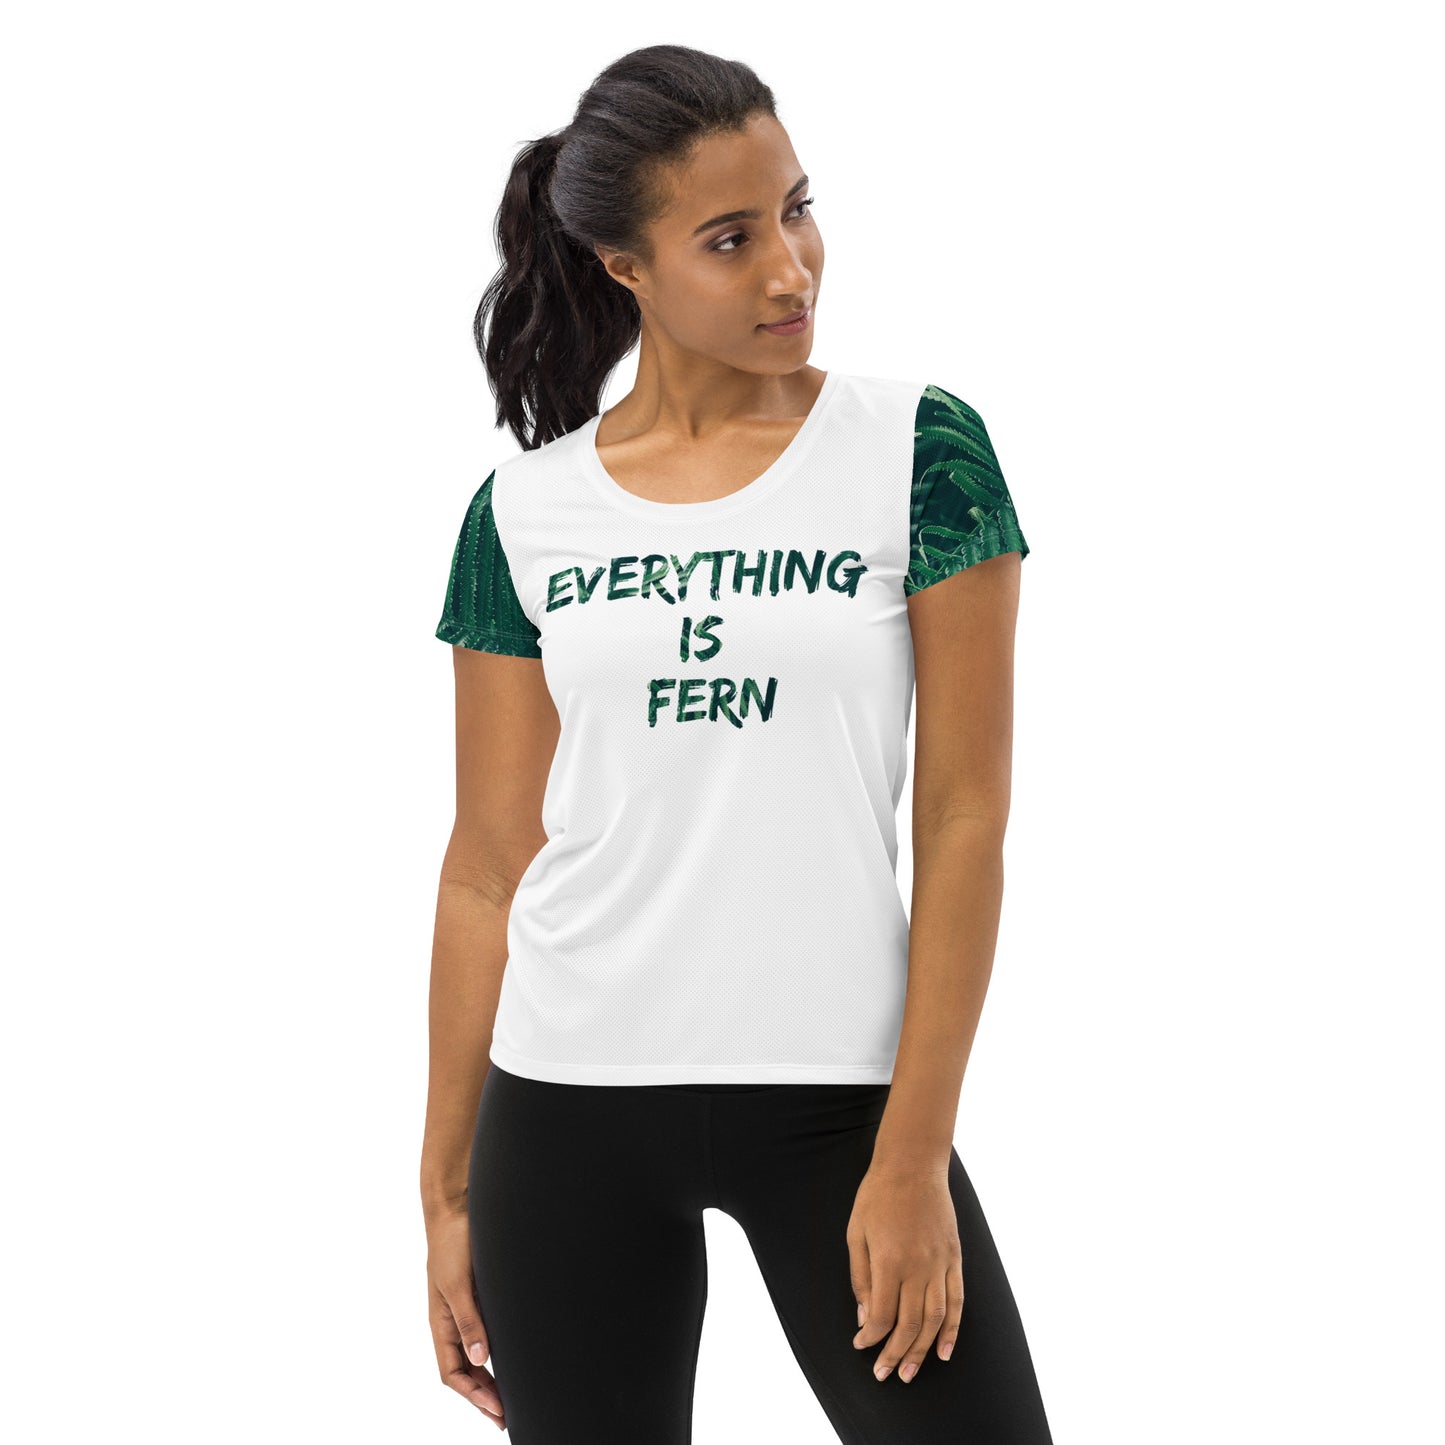 Everything is Fern Women's Athletic T-shirt